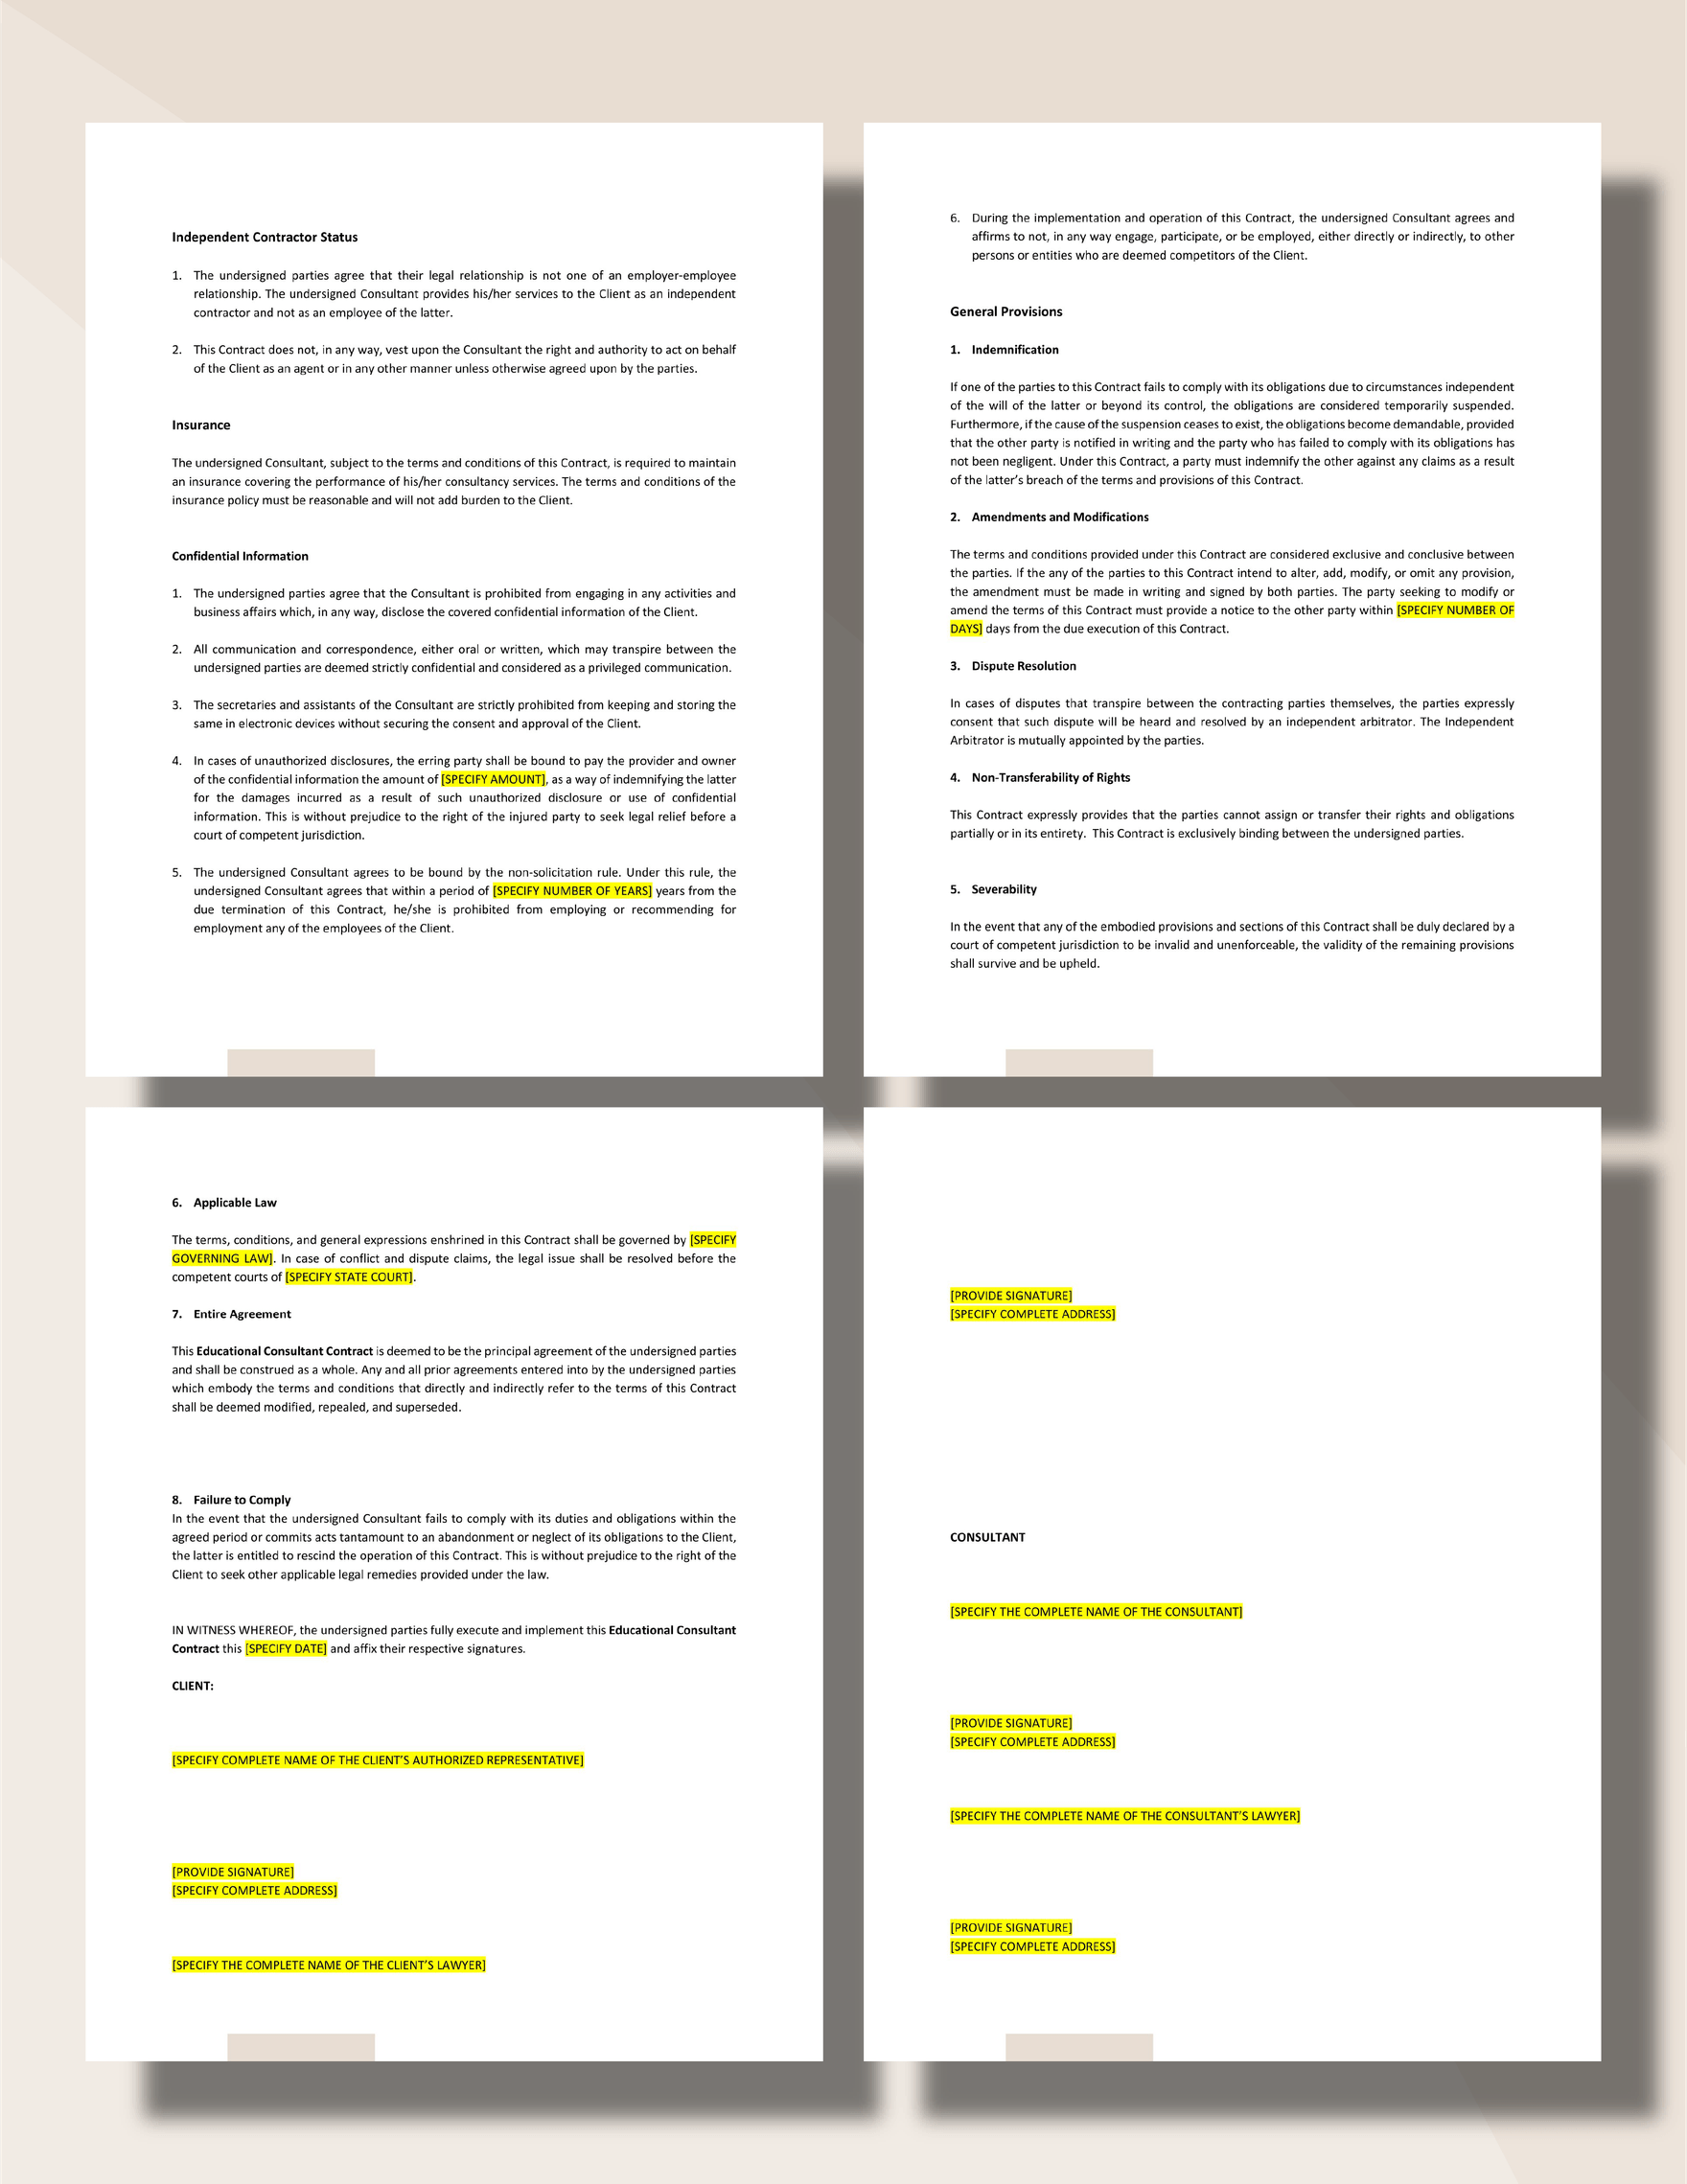 Educational Consultant Contract Template